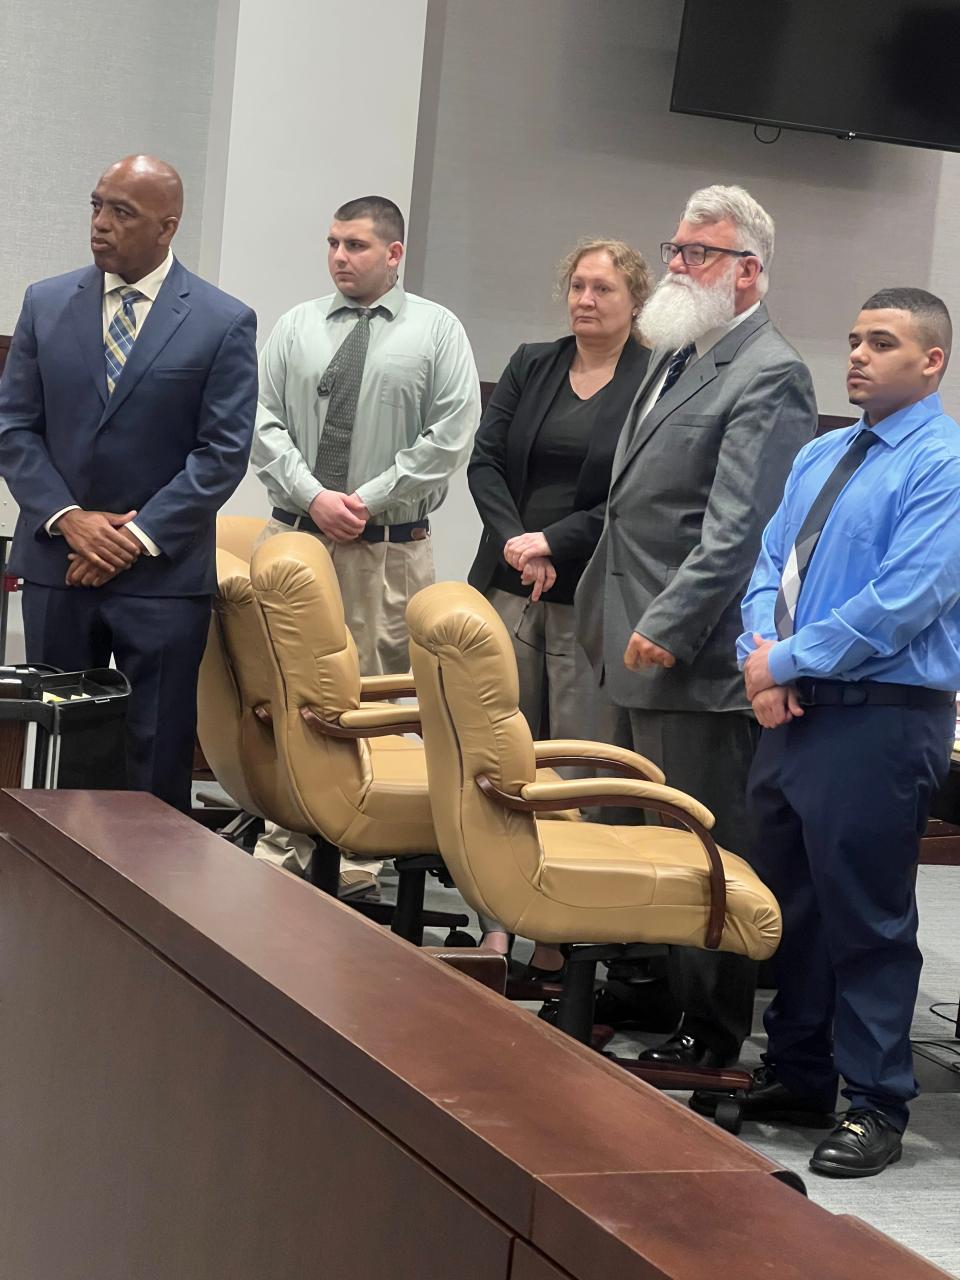 Jordan Hutchinson, 22-year-old Panama City resident, and Chase Chavez, a 21-year-old Panama City resident, stand alongside their attorneys during a trial in August where they were found guilty of attempted second-degree murder with a firearm.